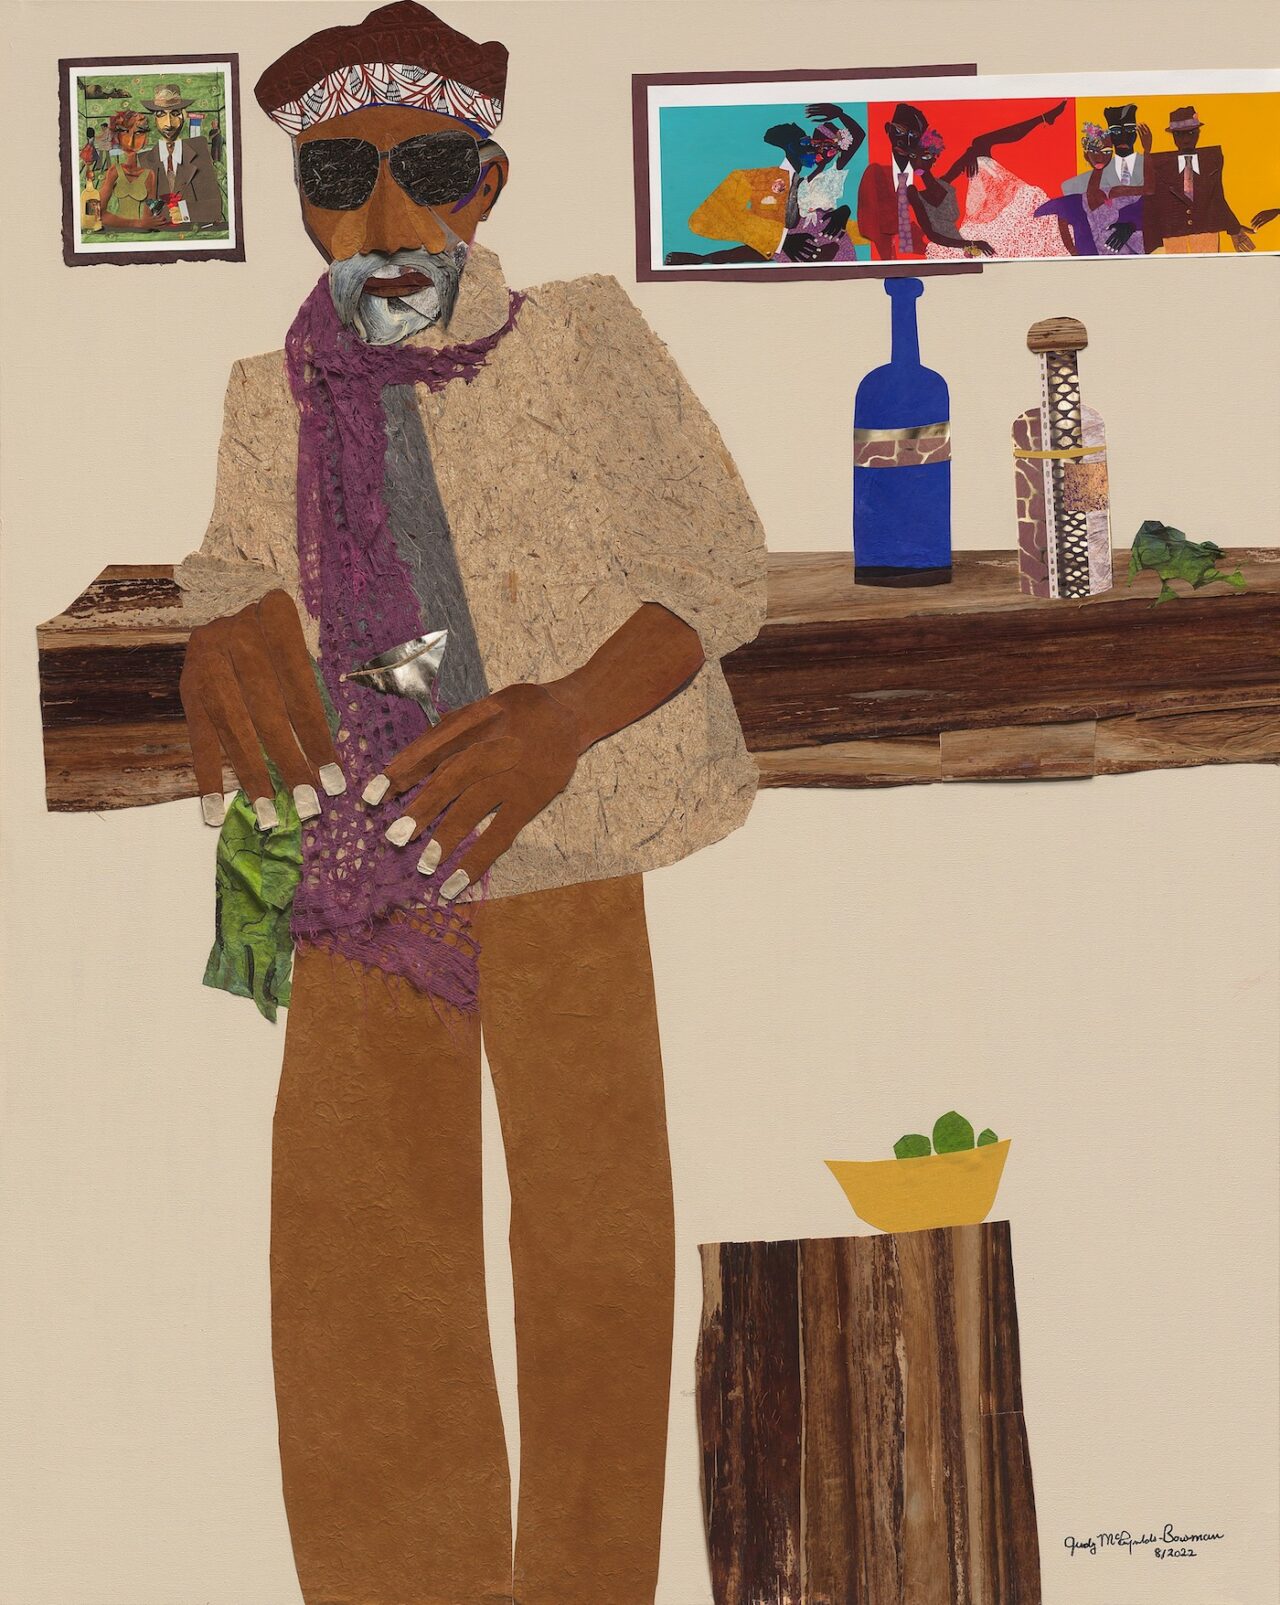 Judy Bowman, Chillin' At The Armory Show, 2022. Mixed media collage on canvas 60 x 48 in 152.4 x 121.9 cm. Image courtesy the artist and
Museum of Contemporary Art Detroit